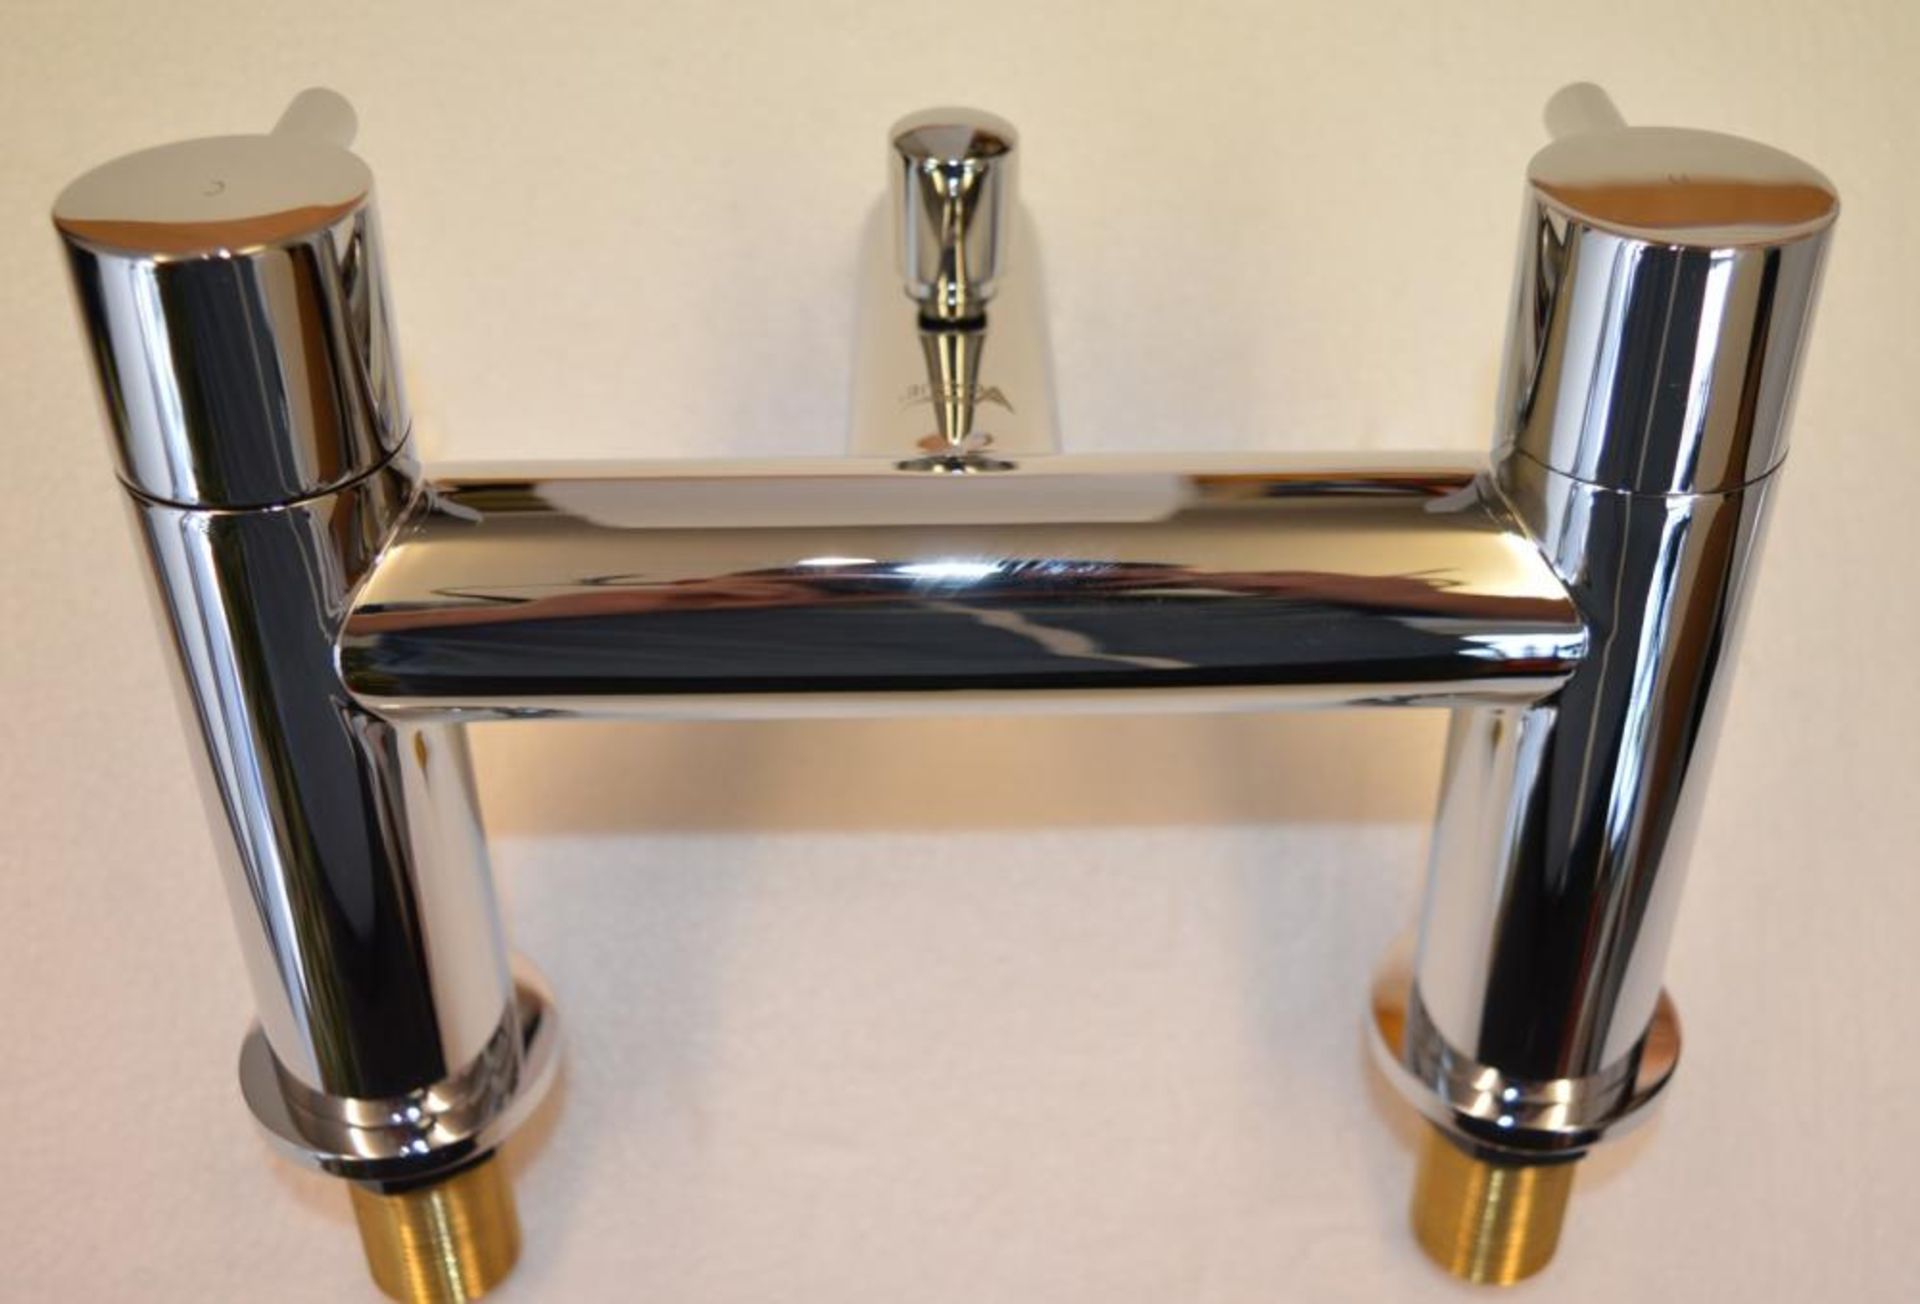 1 x Vogue Bathrooms Series 5 Bath Shower Mixer - Modern Bath Mixer Tap in Bright Chrome With - Image 4 of 5